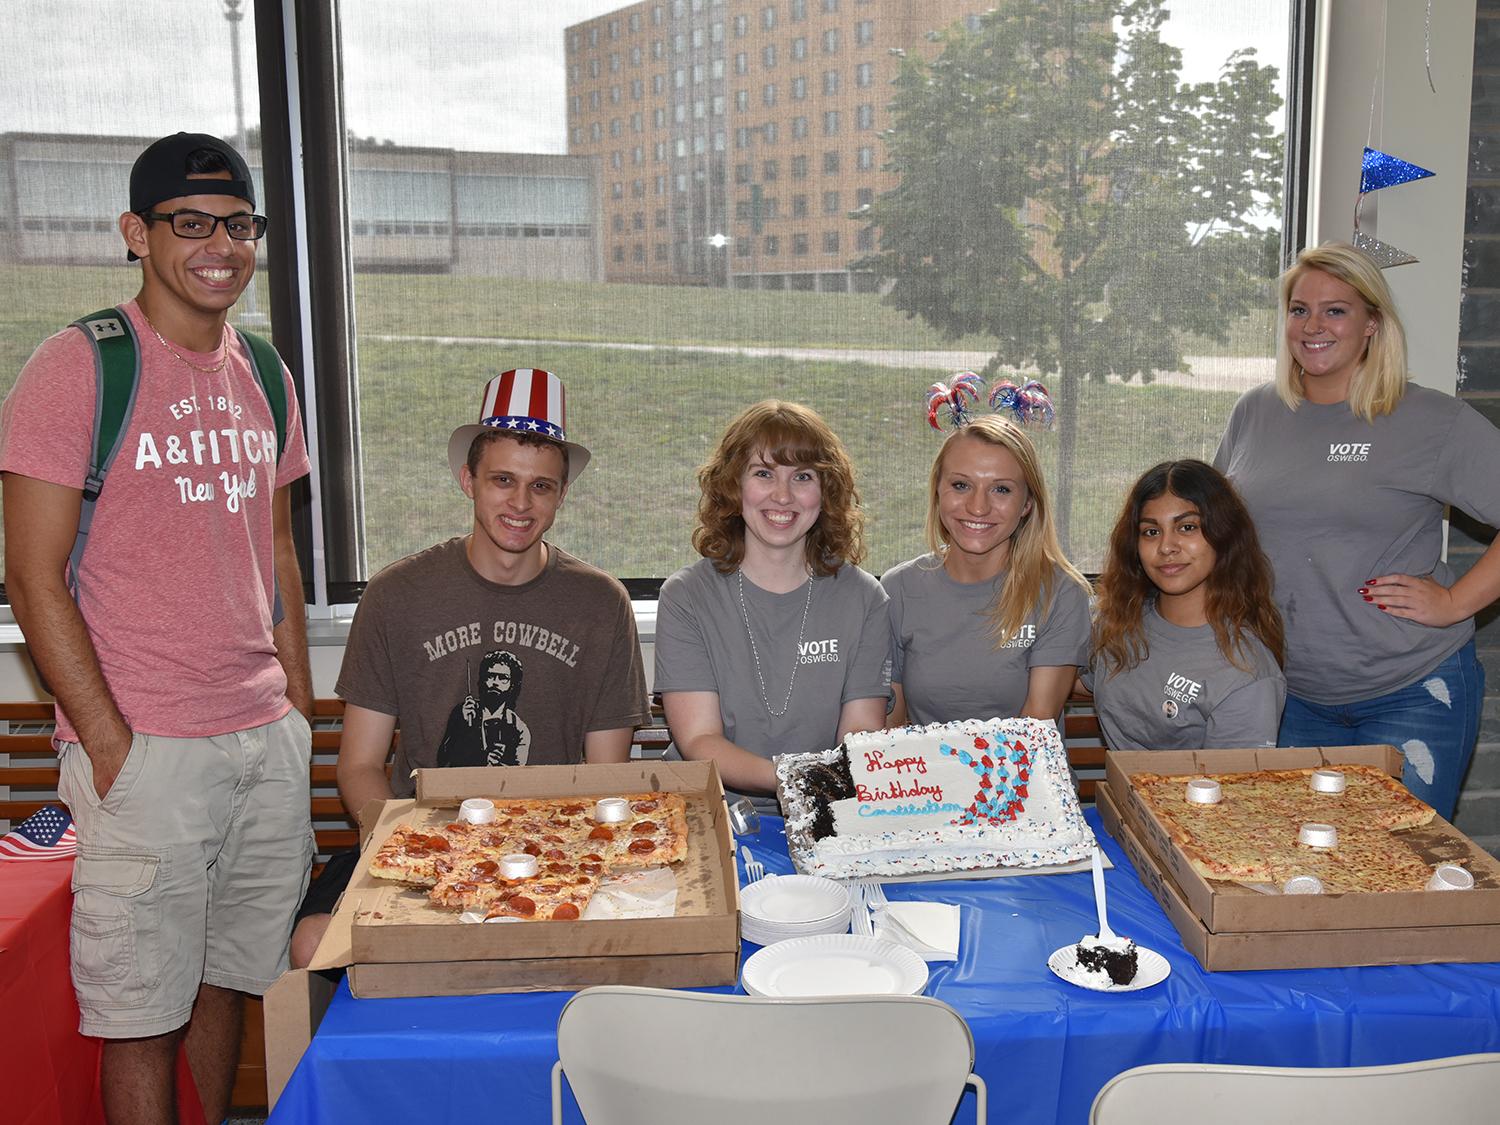 Students with pizza and cake at Constitution Day party in 2018